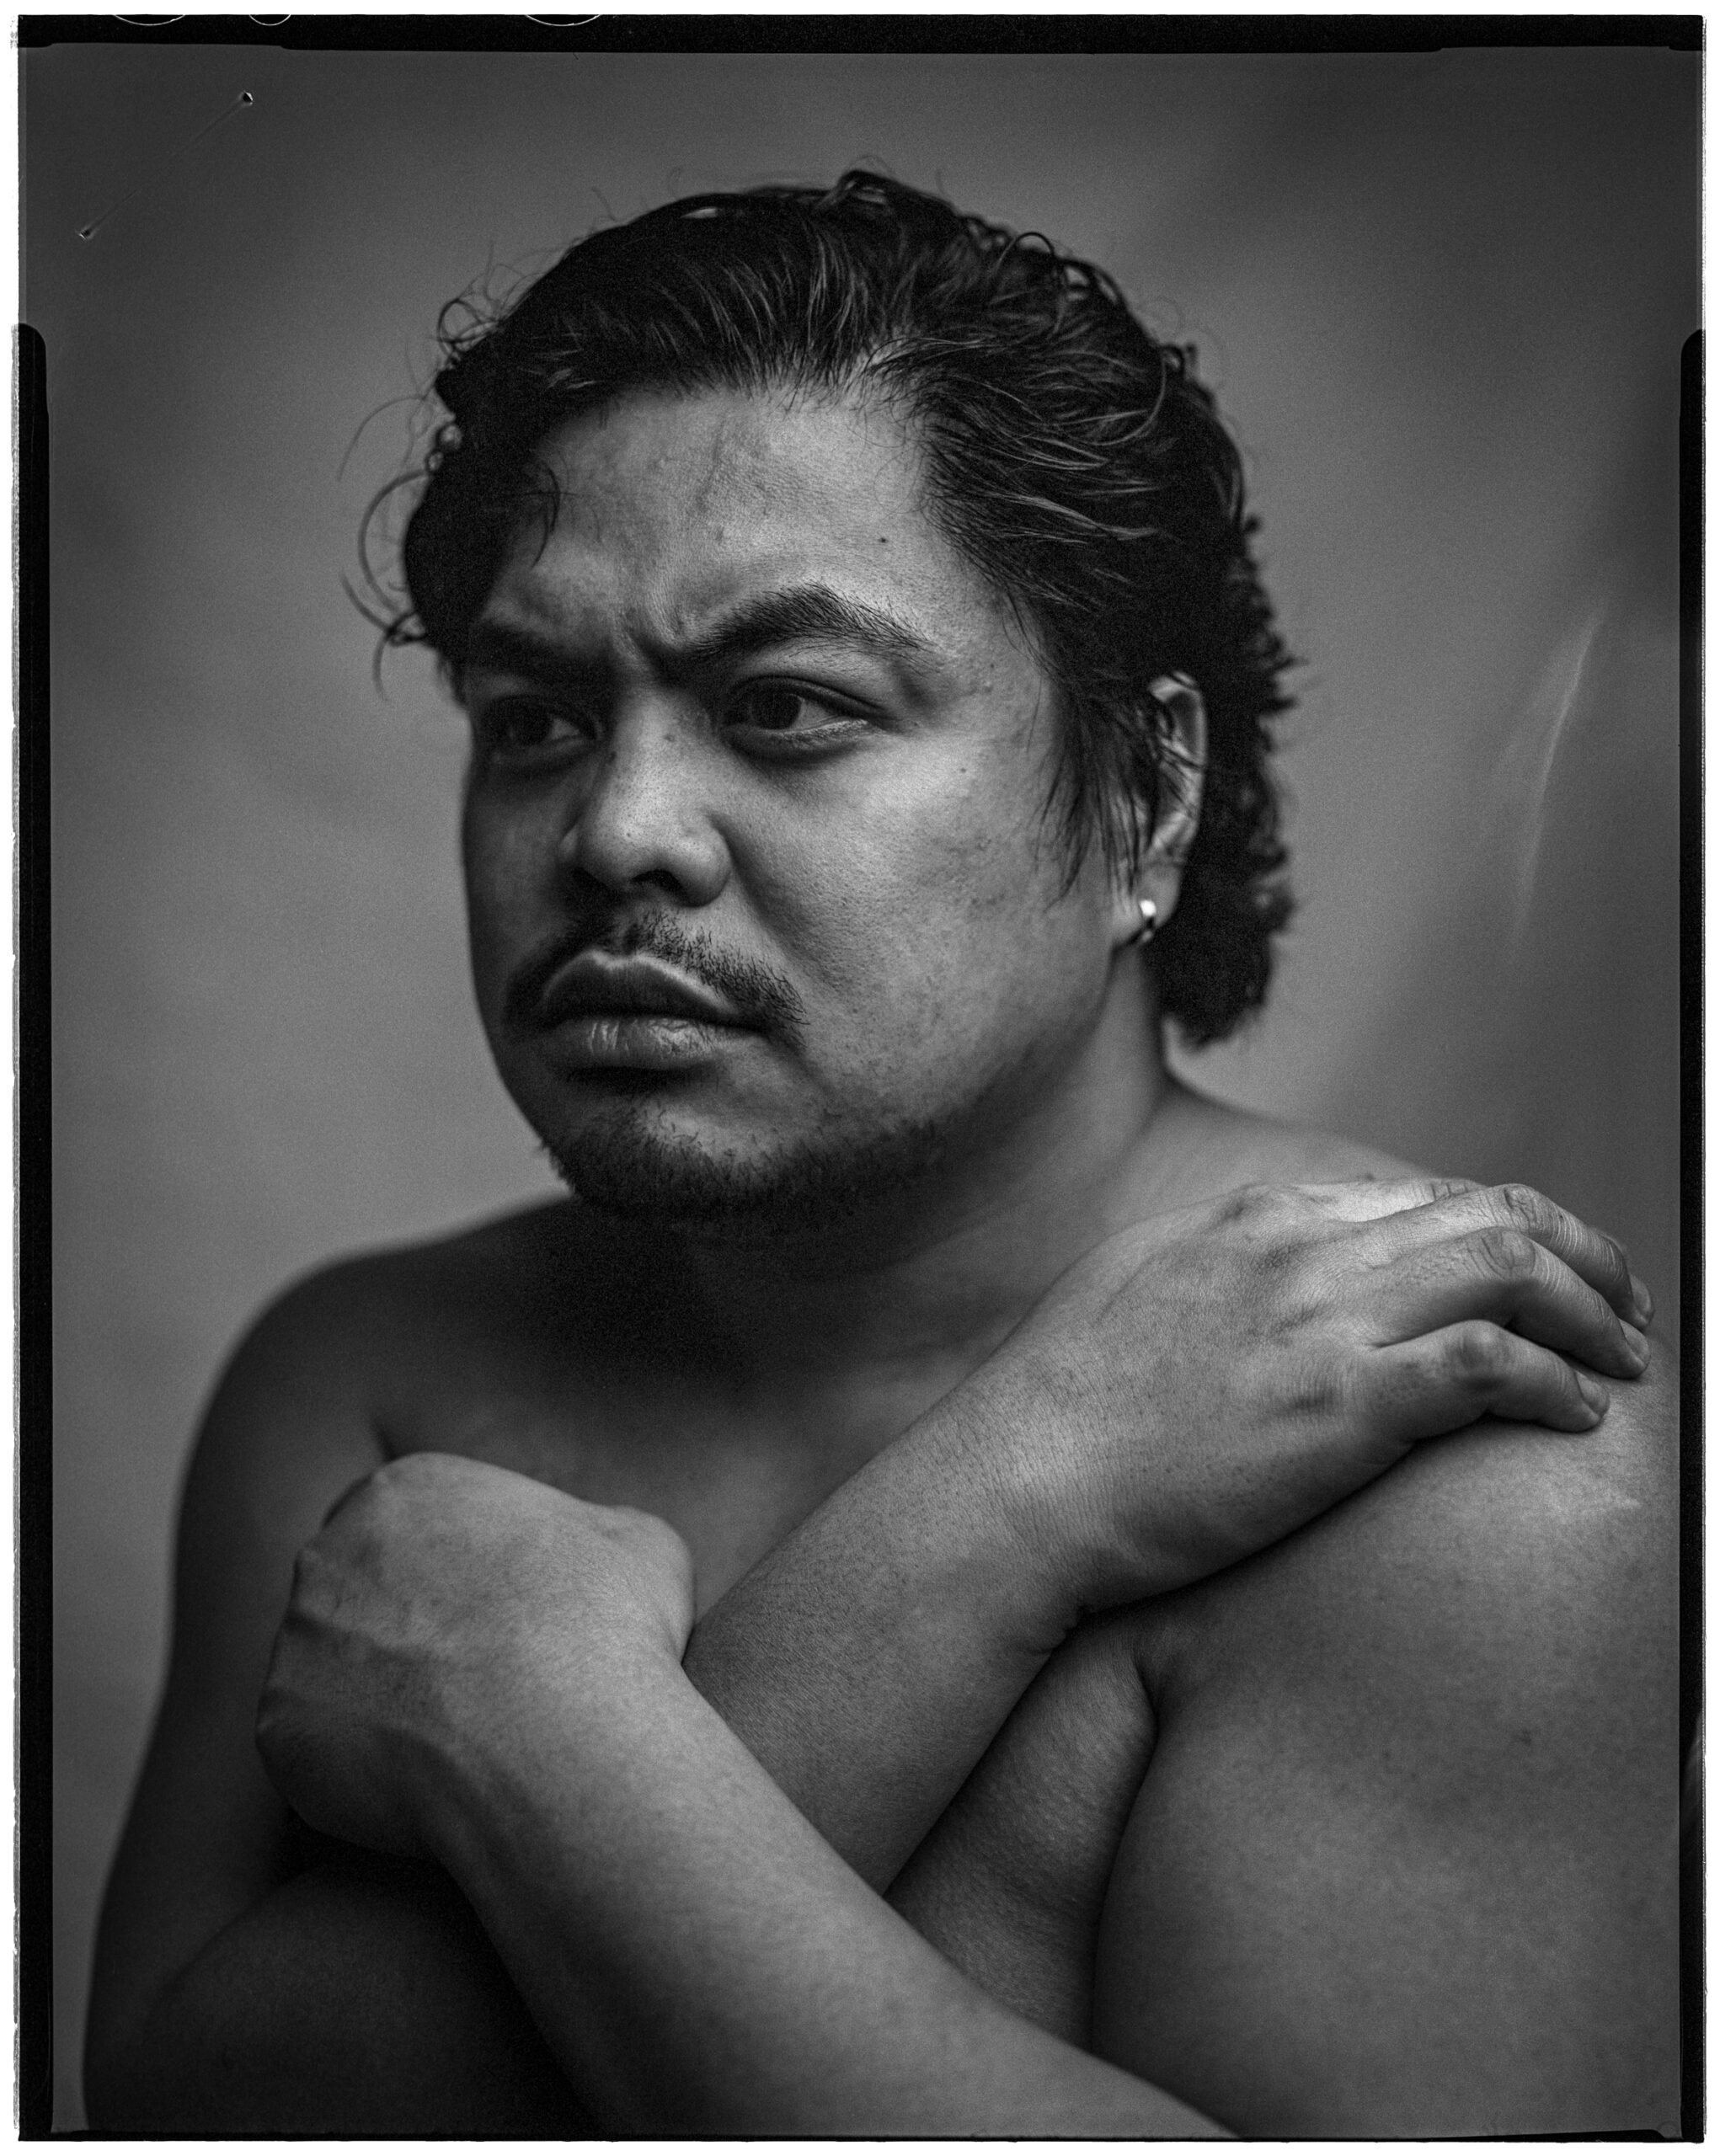 Actor Red Concepcion as photographed by Eli Warren